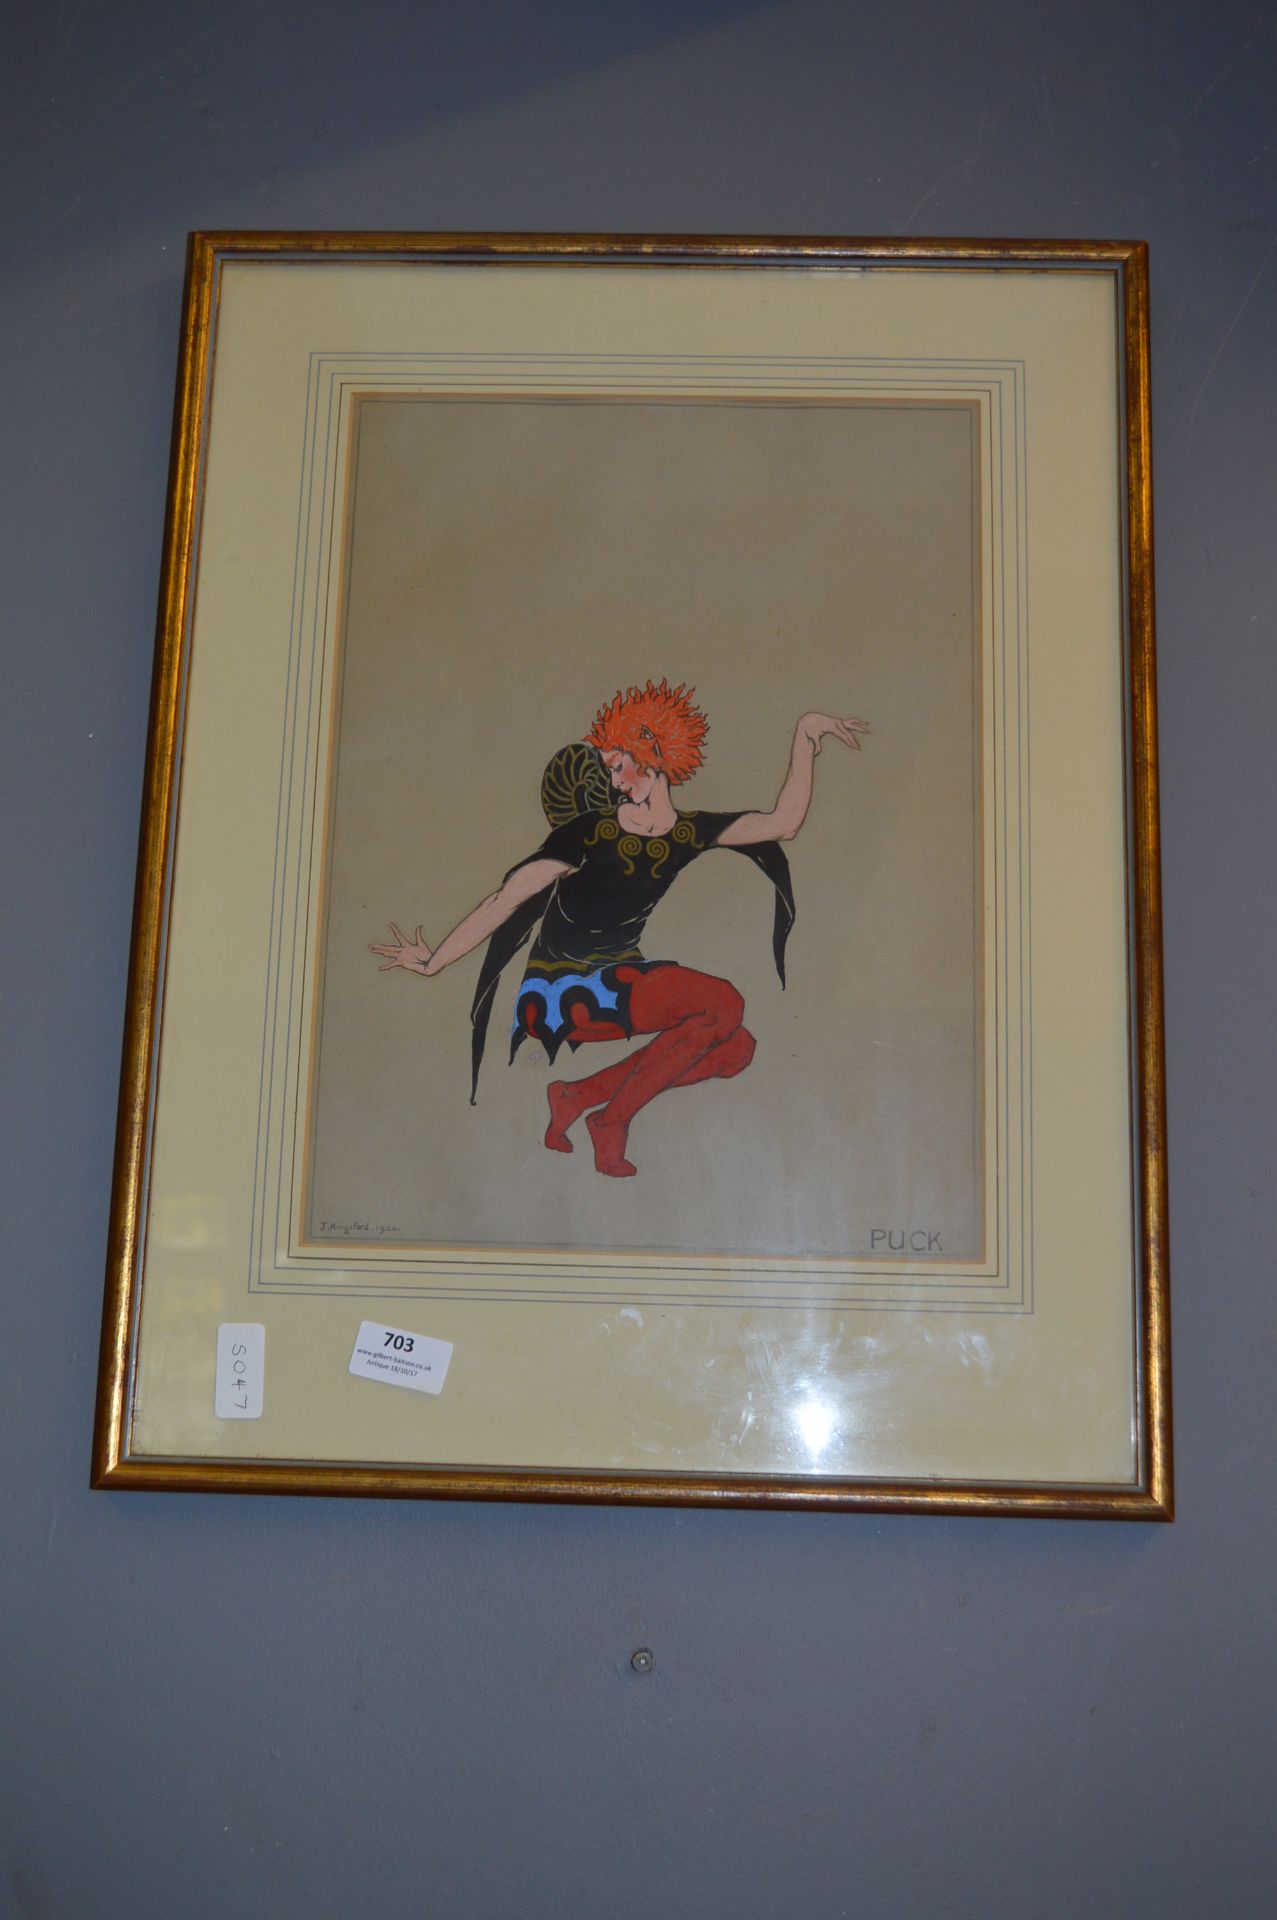 Framed Watercolour on Paper - Puck Signed J Kingsford 1920